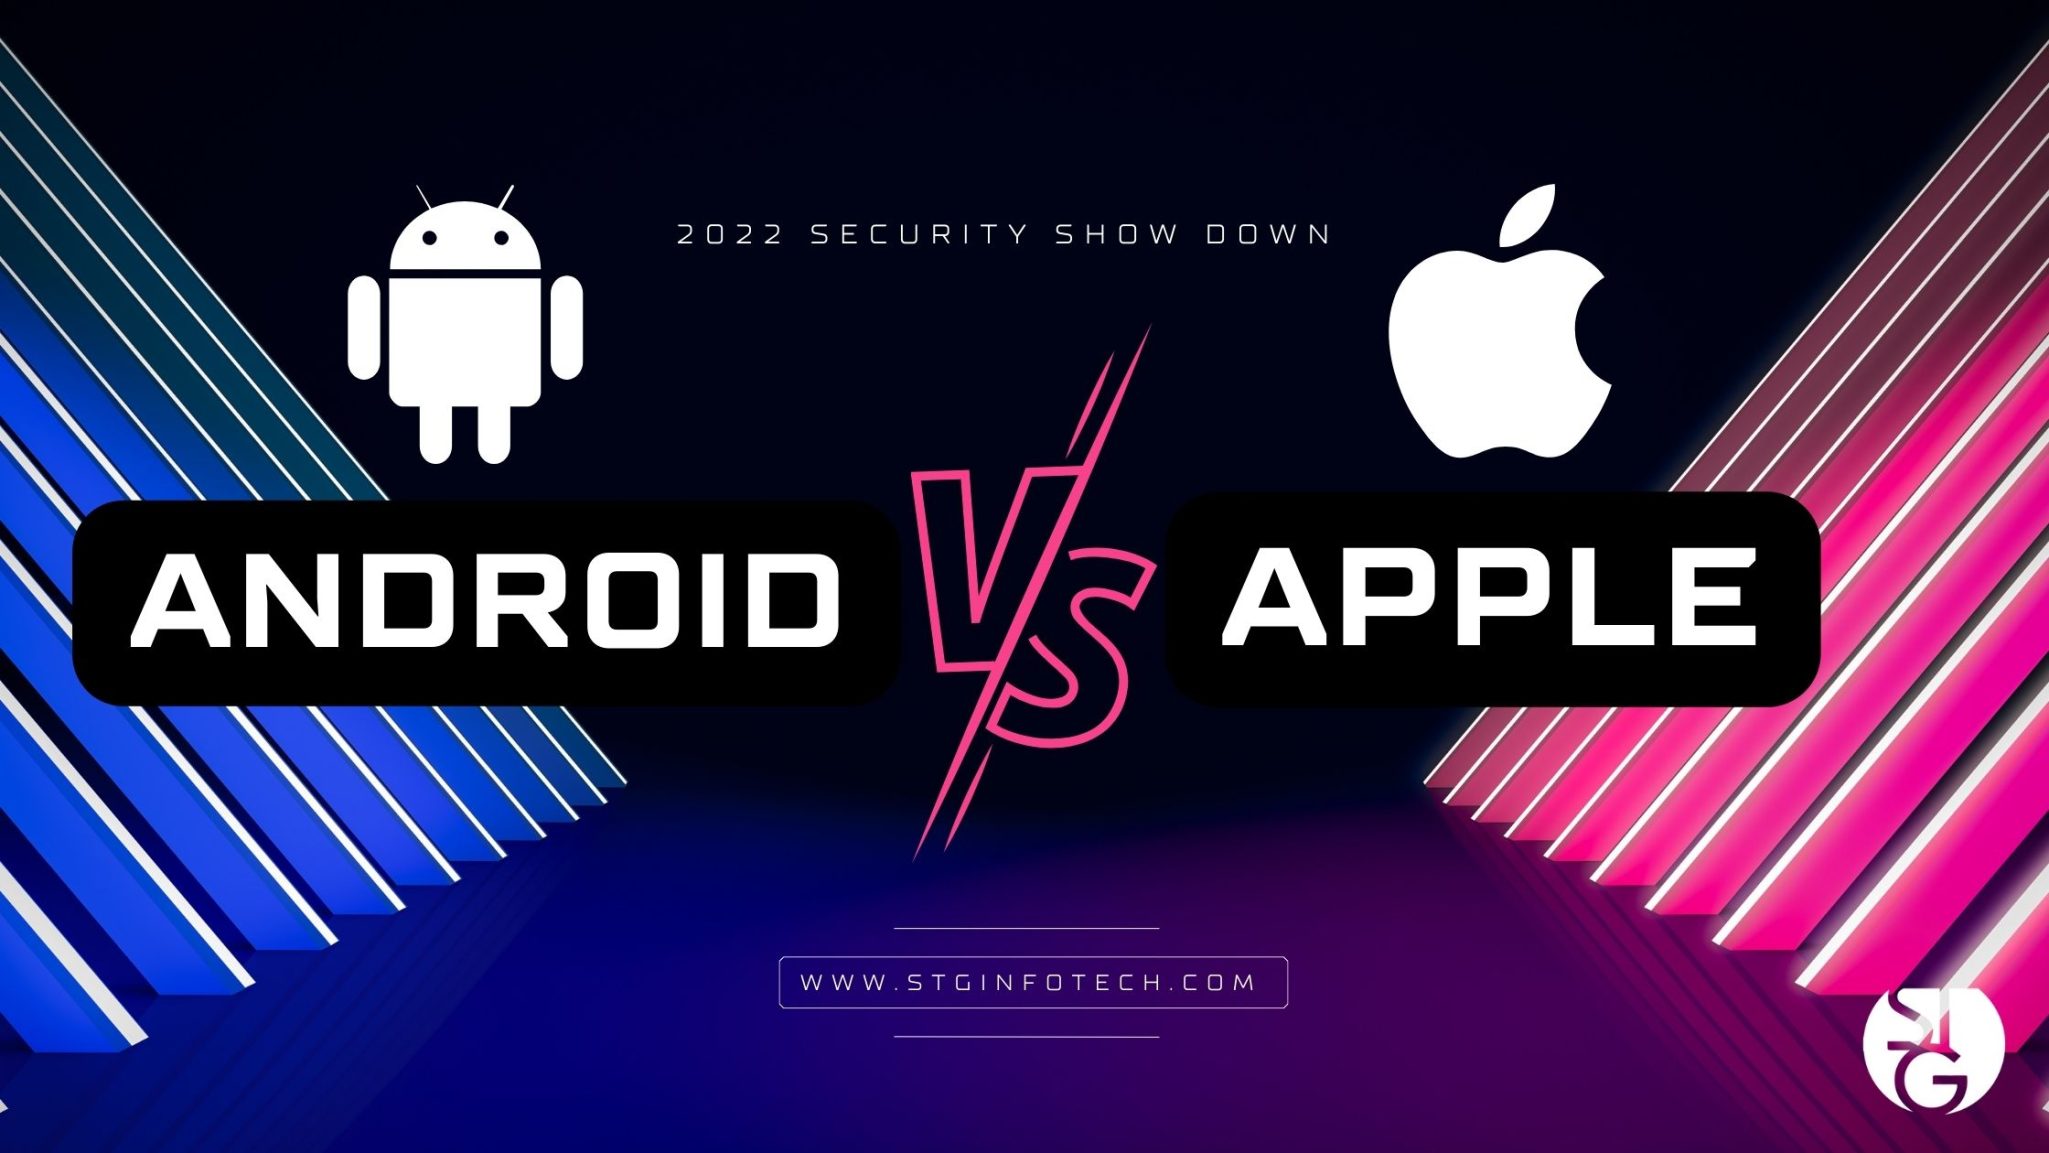 Android vs. Apple iOS - The Great Debate